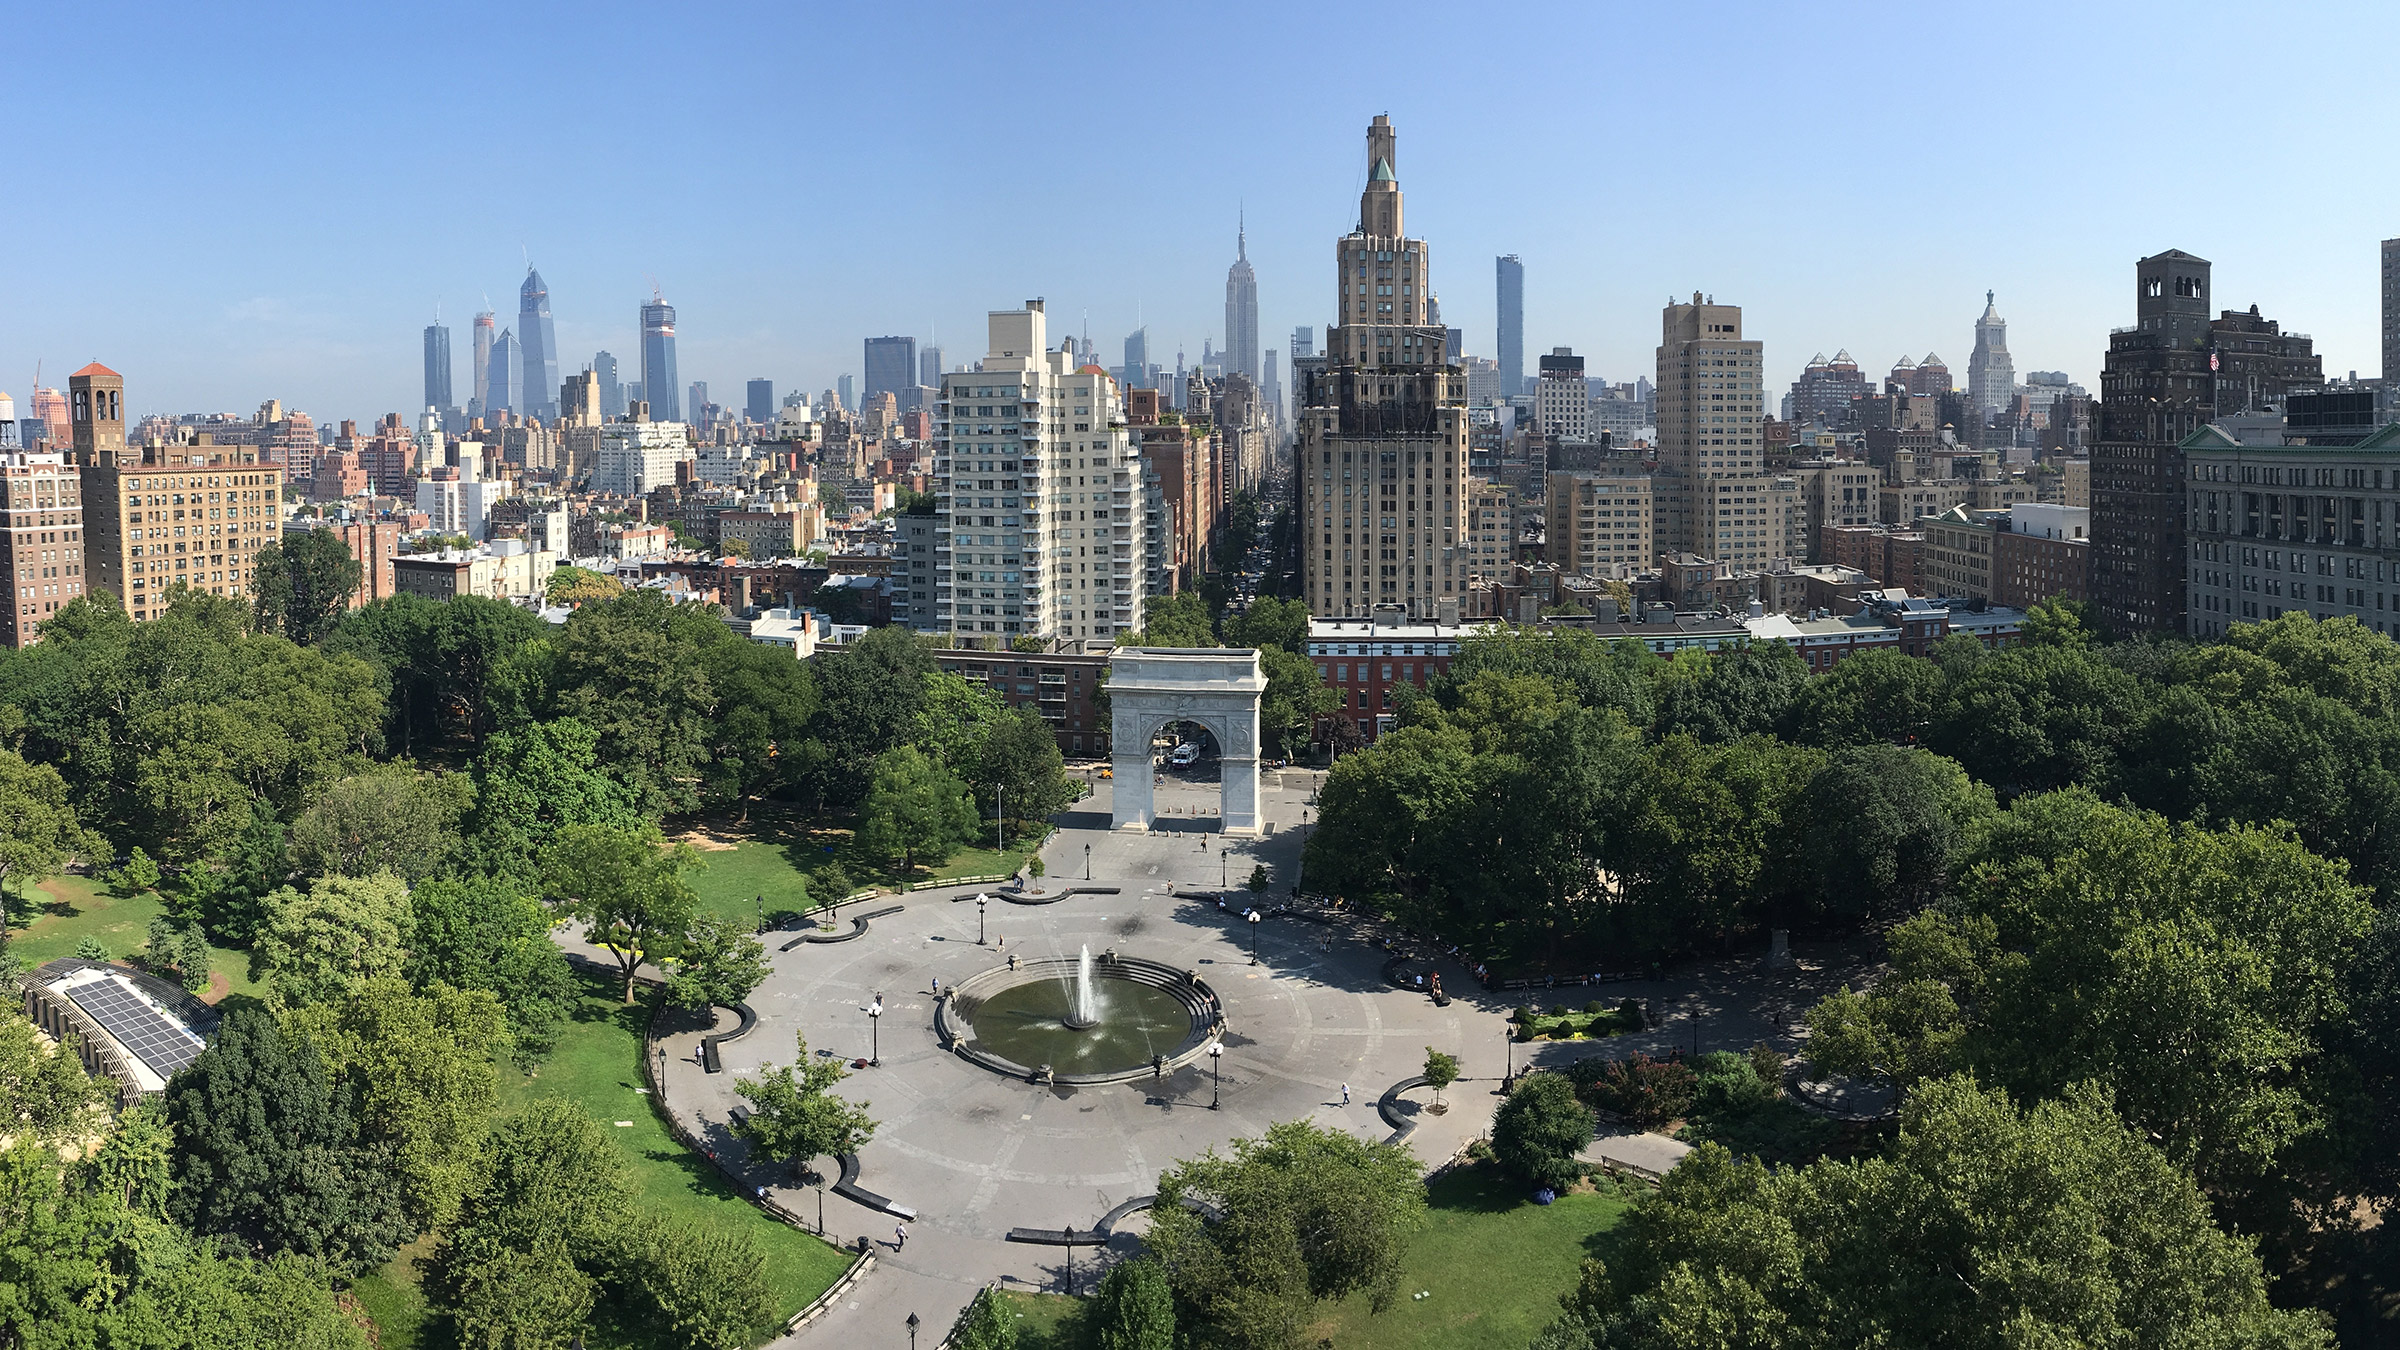 Washington Square Park from aerial view